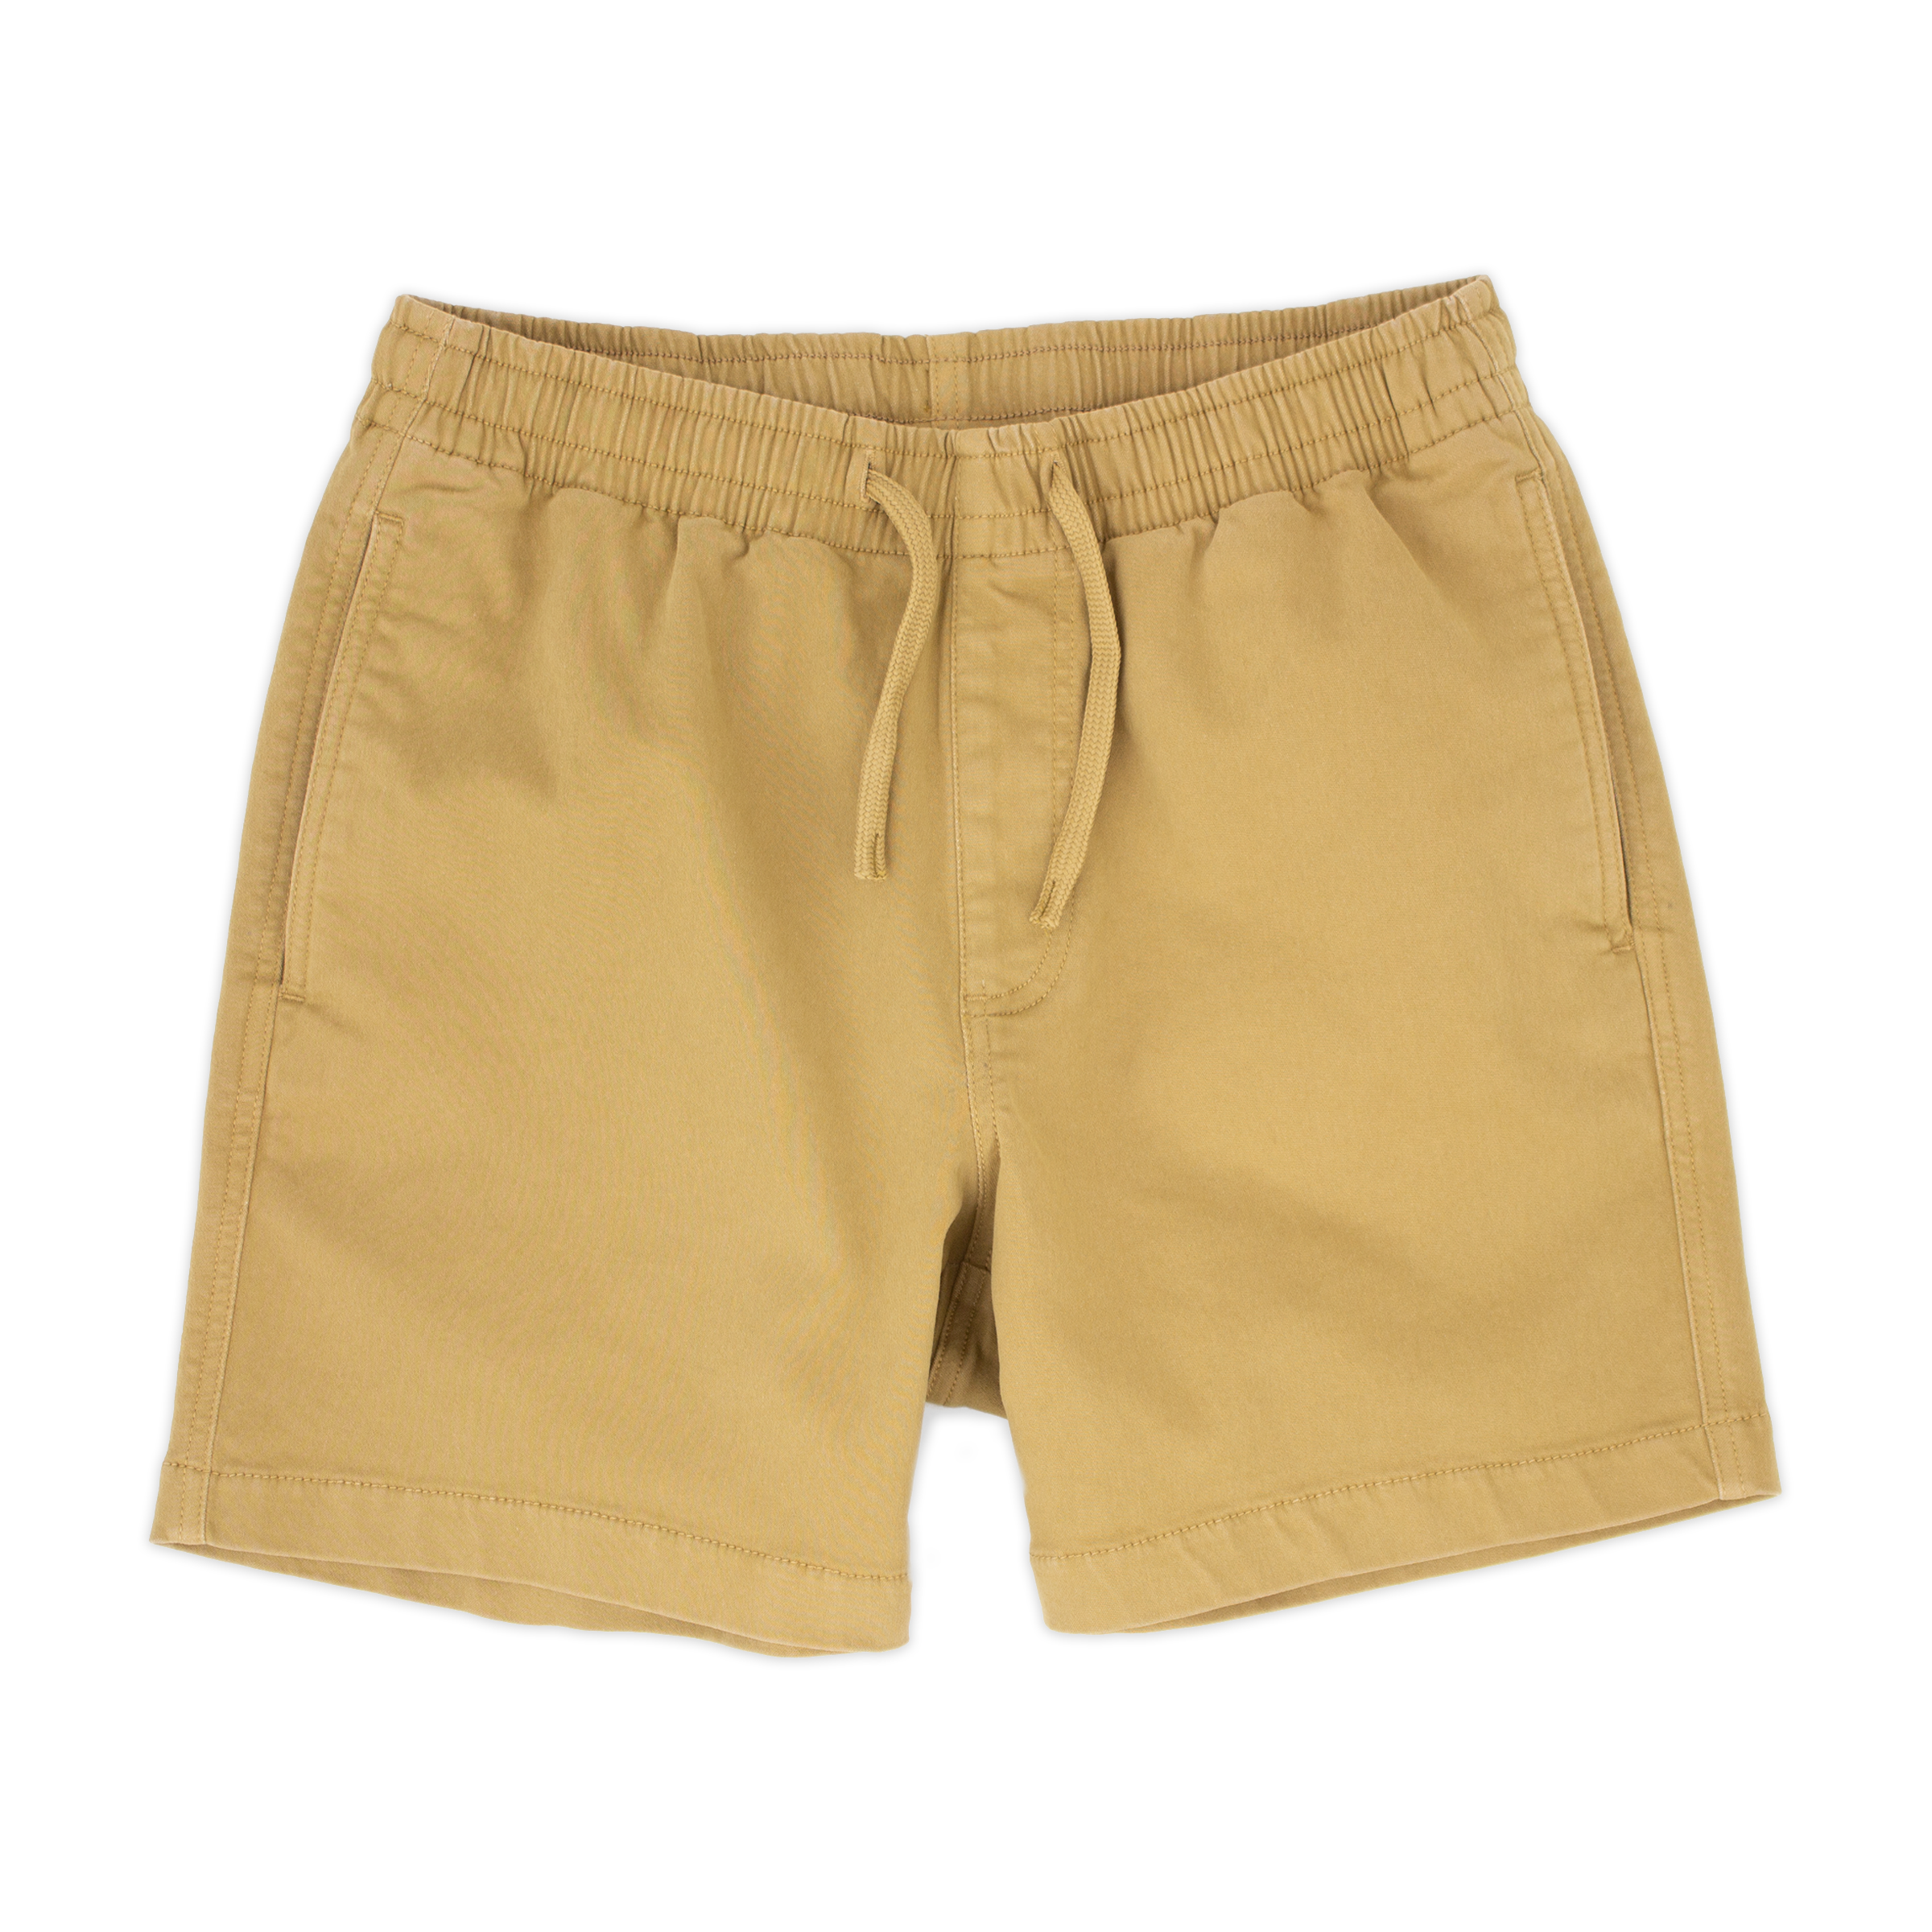 Alto Short 5.5" inseam in Khaki front with elastic waistband, fabric drawstring, faux fly, and two front side seam pockets